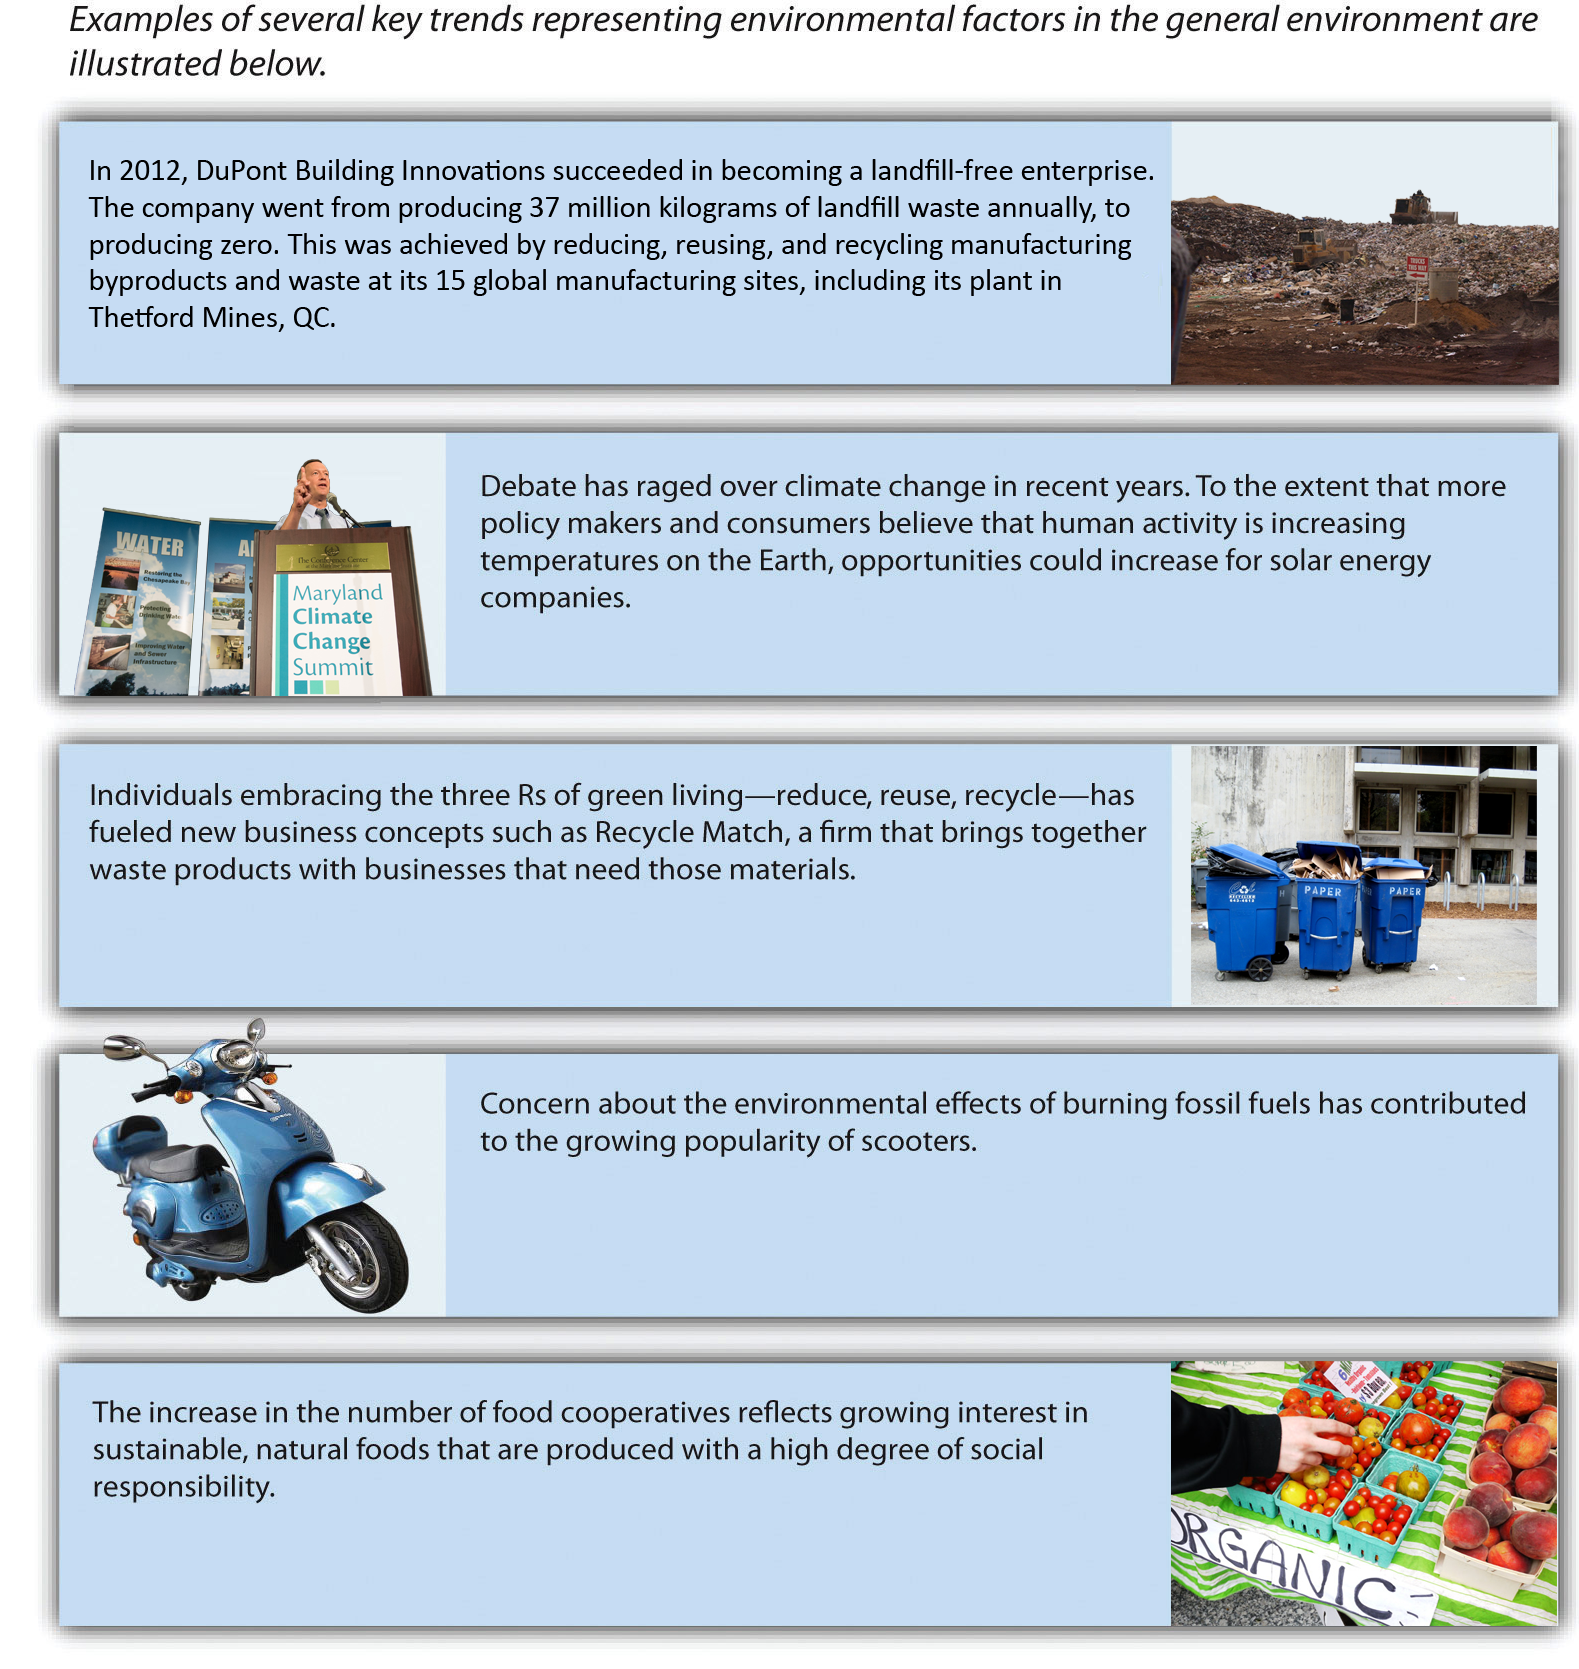 Examples of key trends representing environmental factors. Image description available